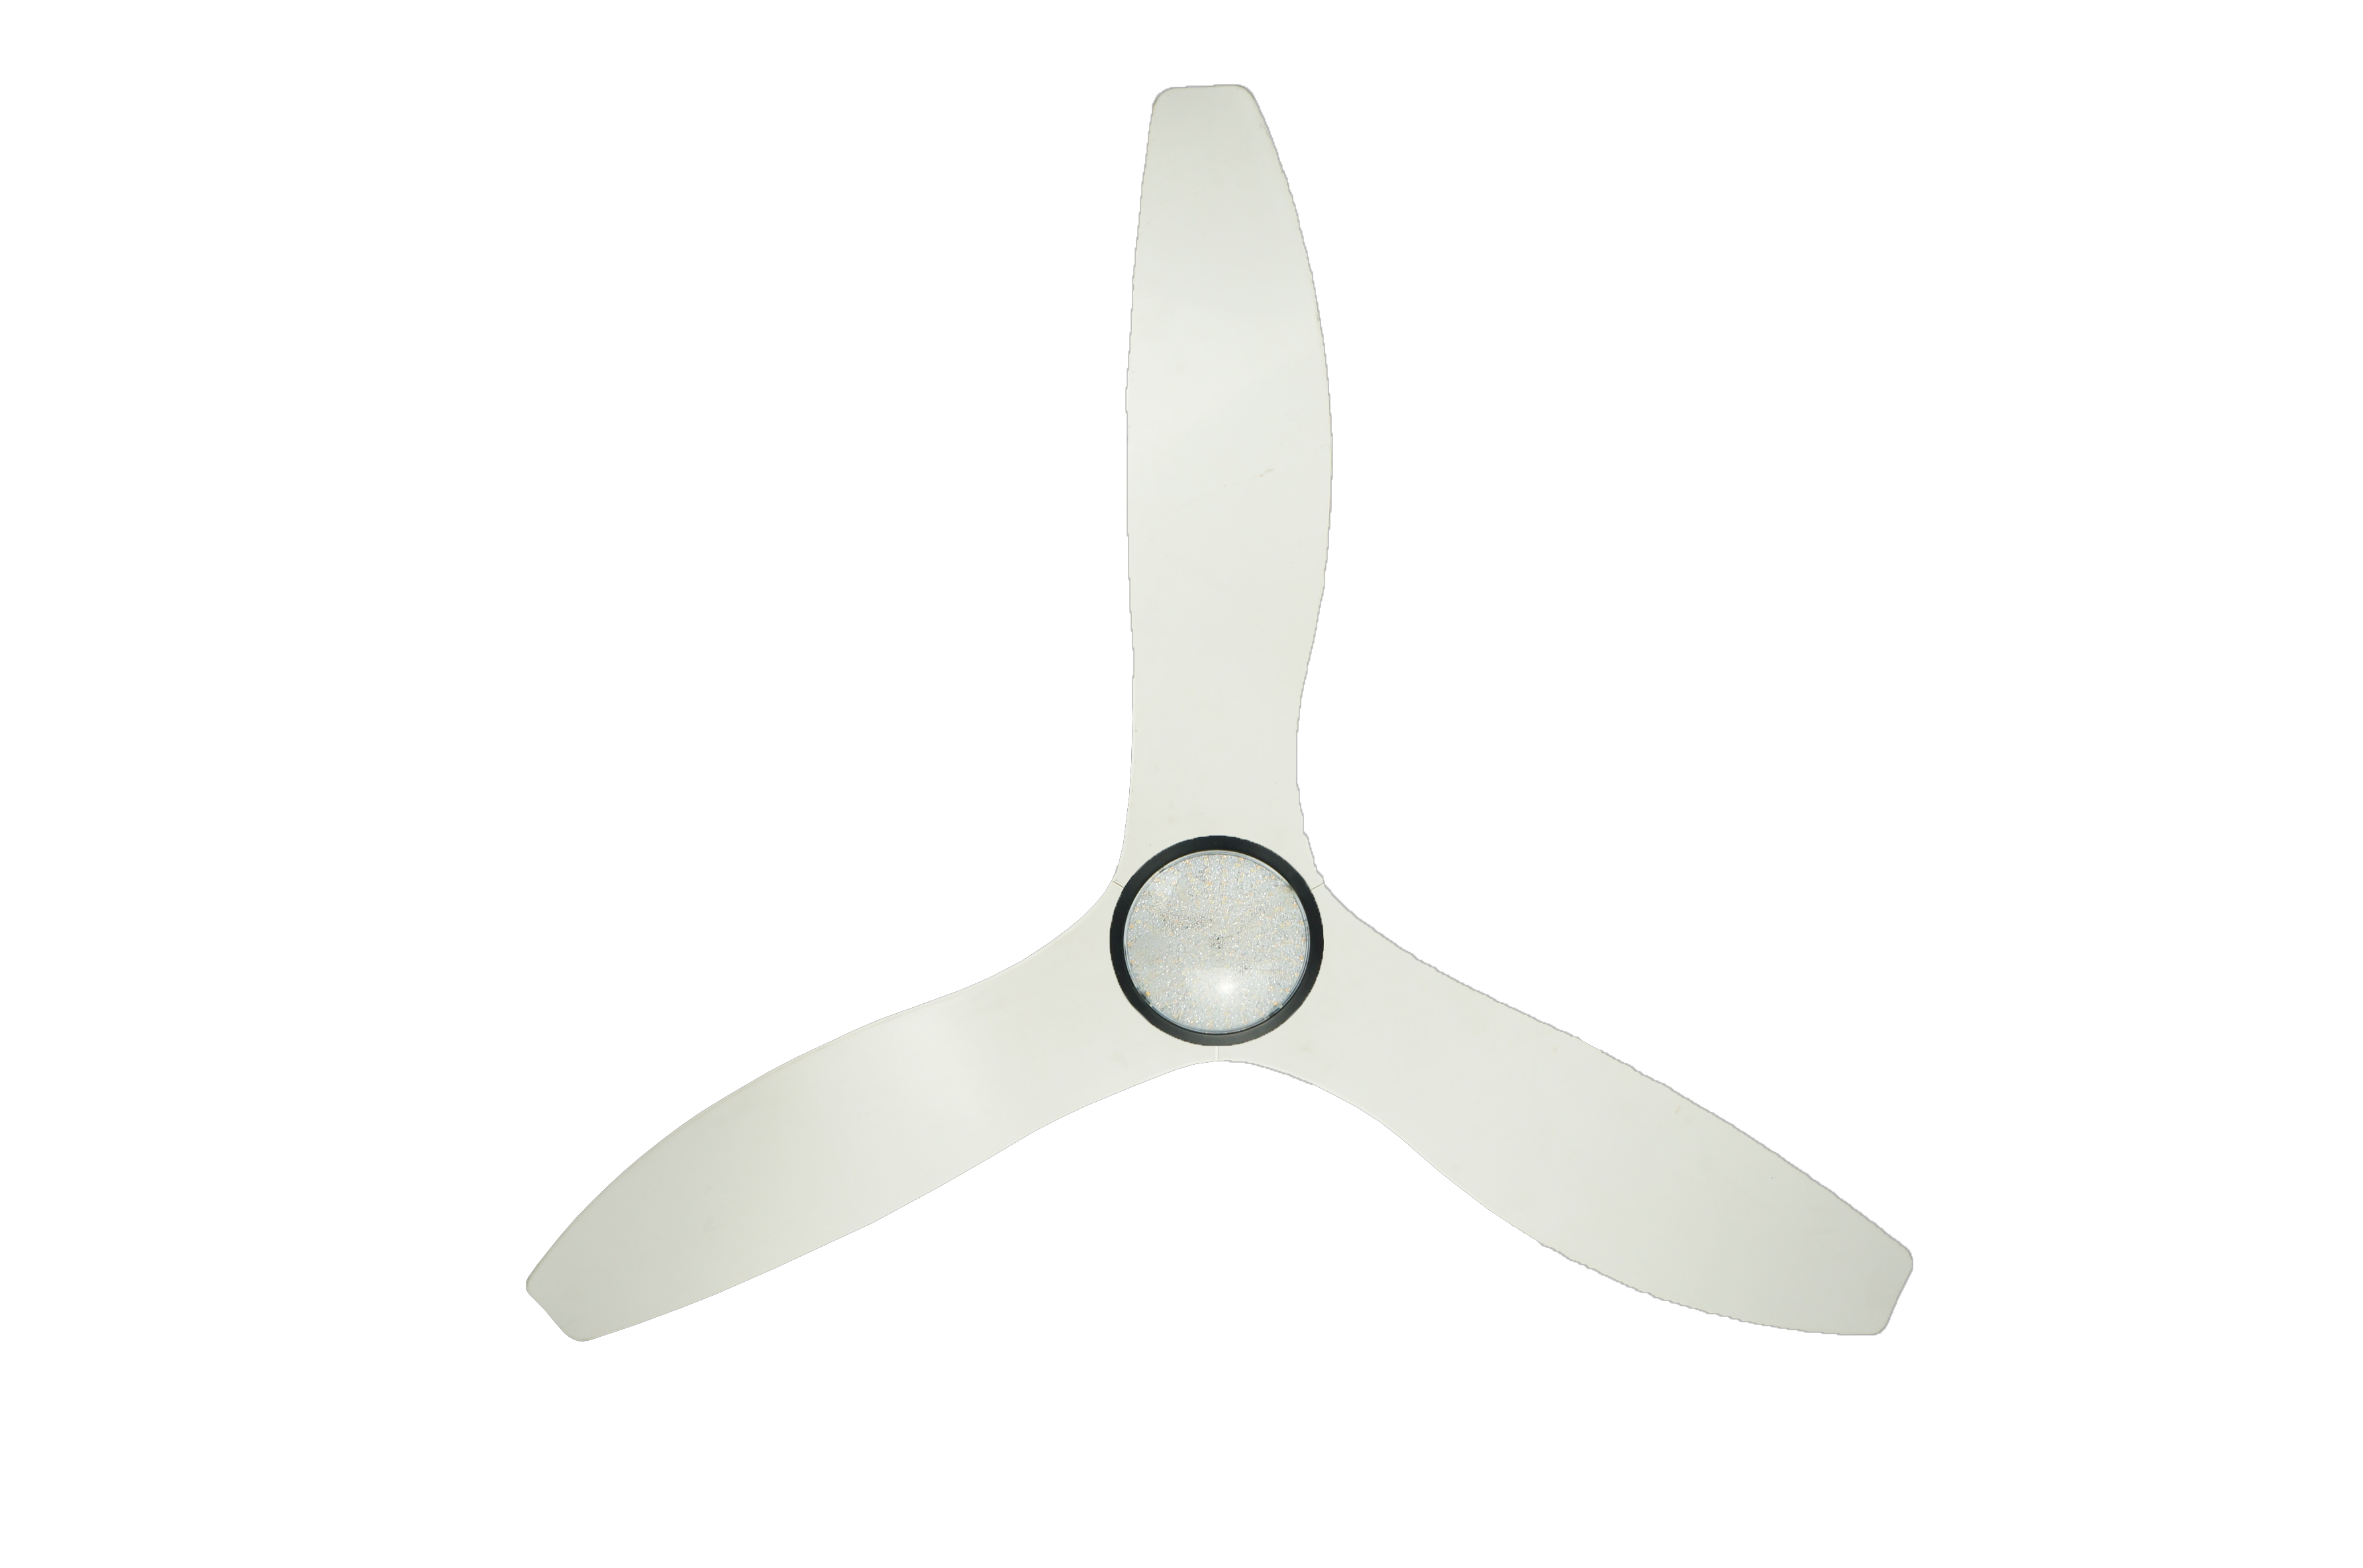 Farmhouse Simple Air Cooler Dc Bruschless Ceiling Fan ABS Plastic Blade LED Black Ceiling Fan with Light